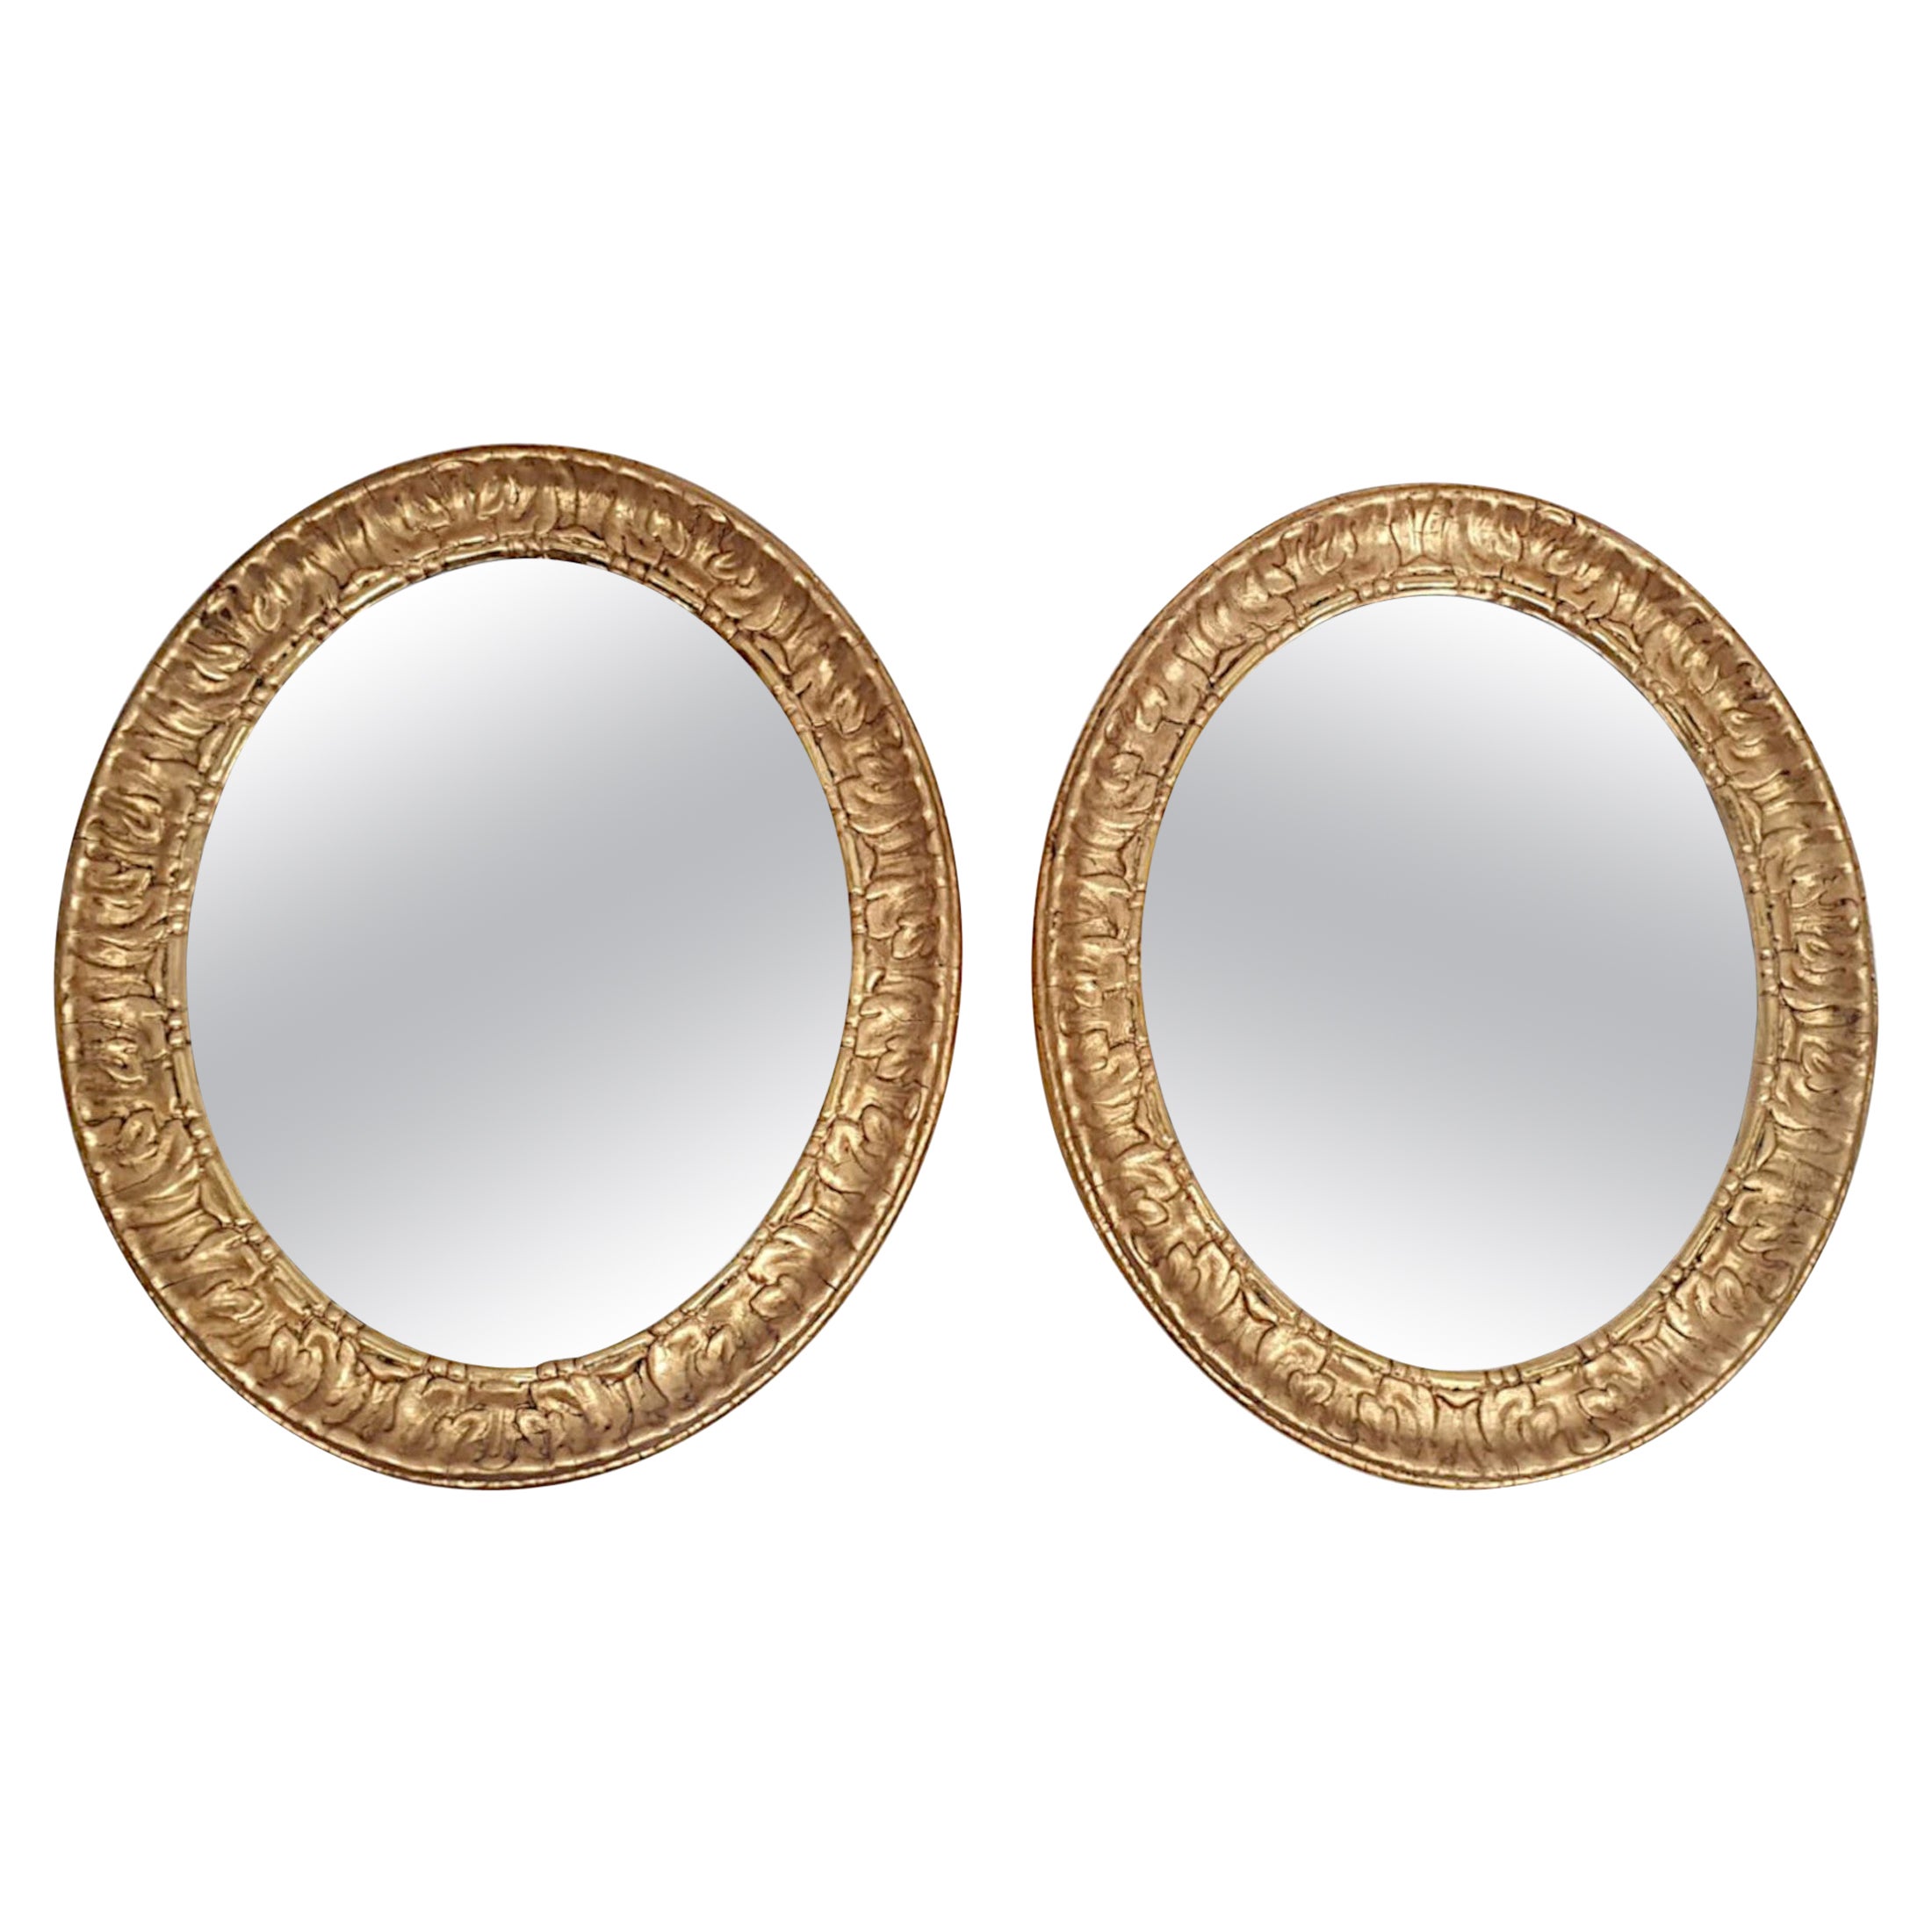 A Lovely Pair of 19th Century Giltwood Mirrors For Sale